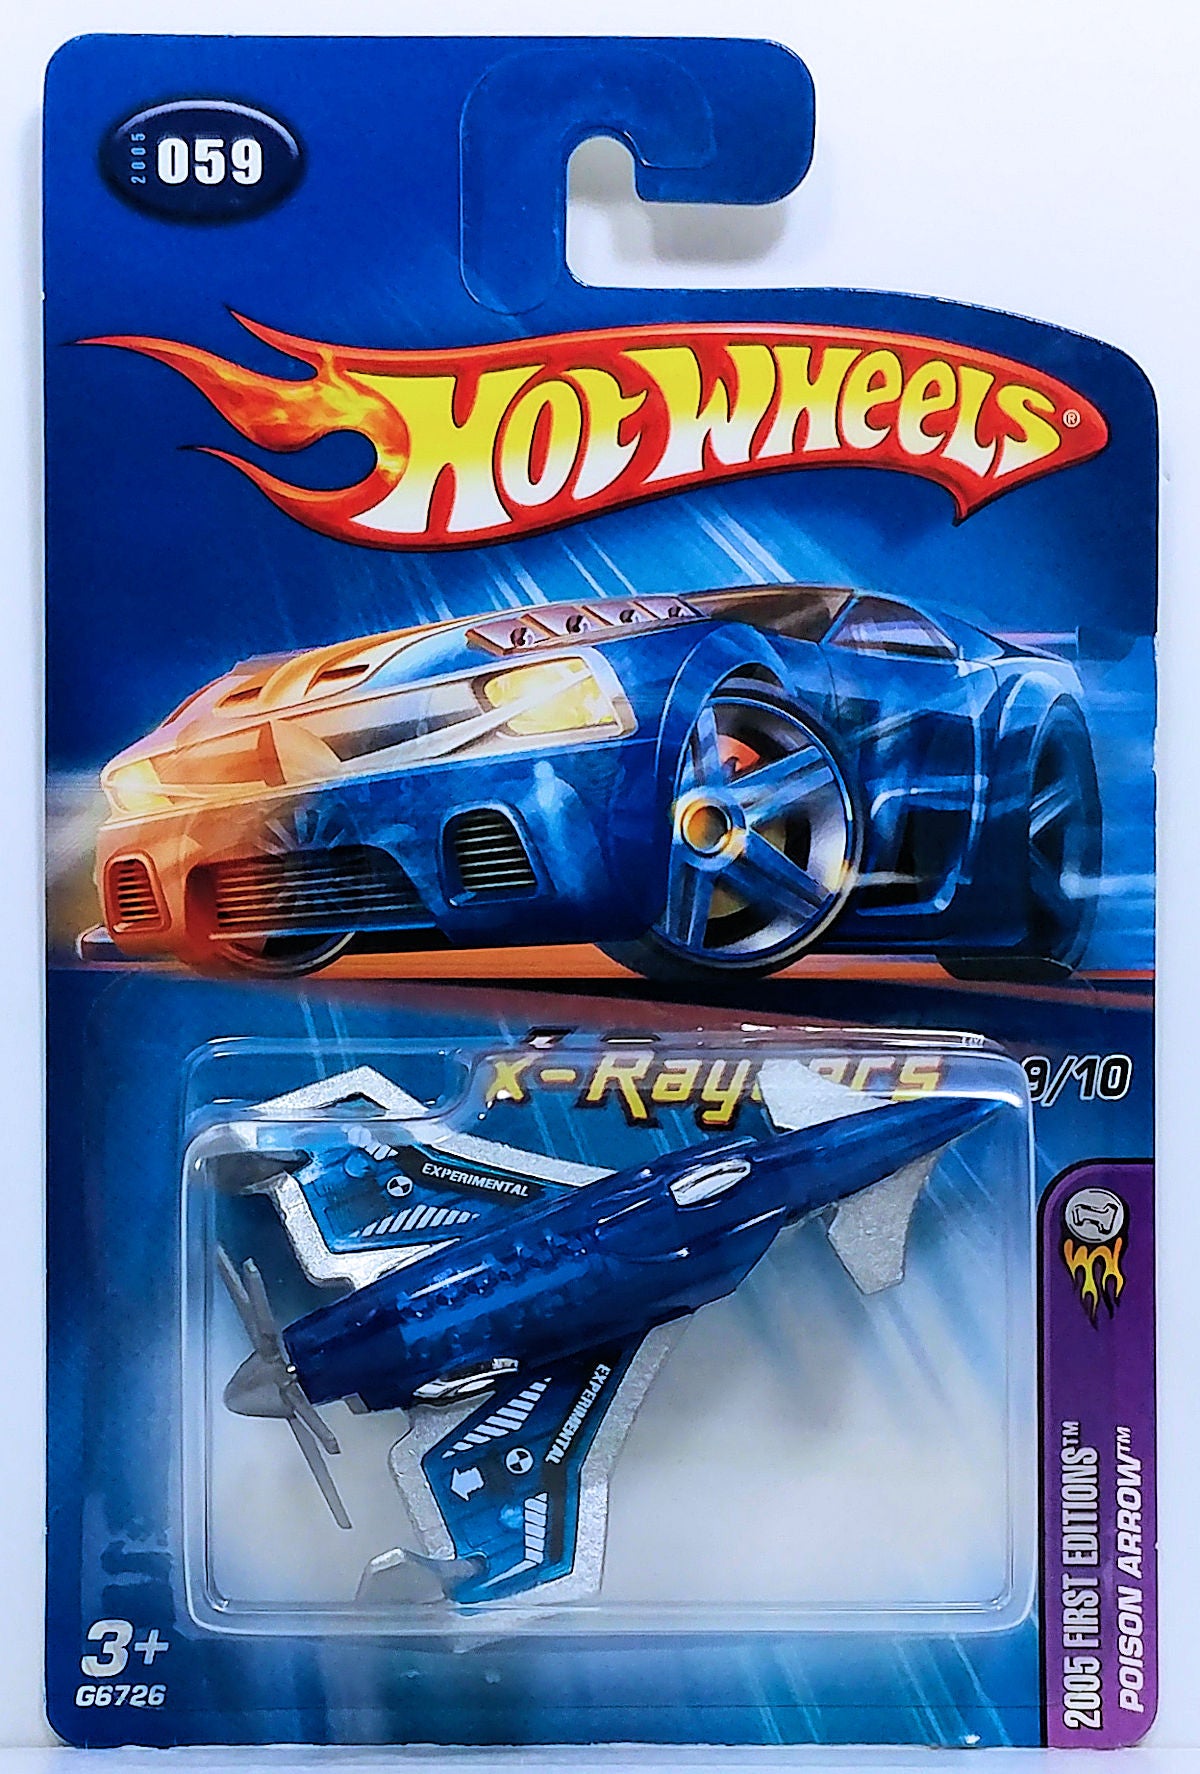 Hot Wheels 2005 - Collector # 059/183 - First Editions / X-Raycers 9/10 - Poison Arrow (Experimental Aircraft) - Transparent Blue - KMart Exclusive - USA '05 Card